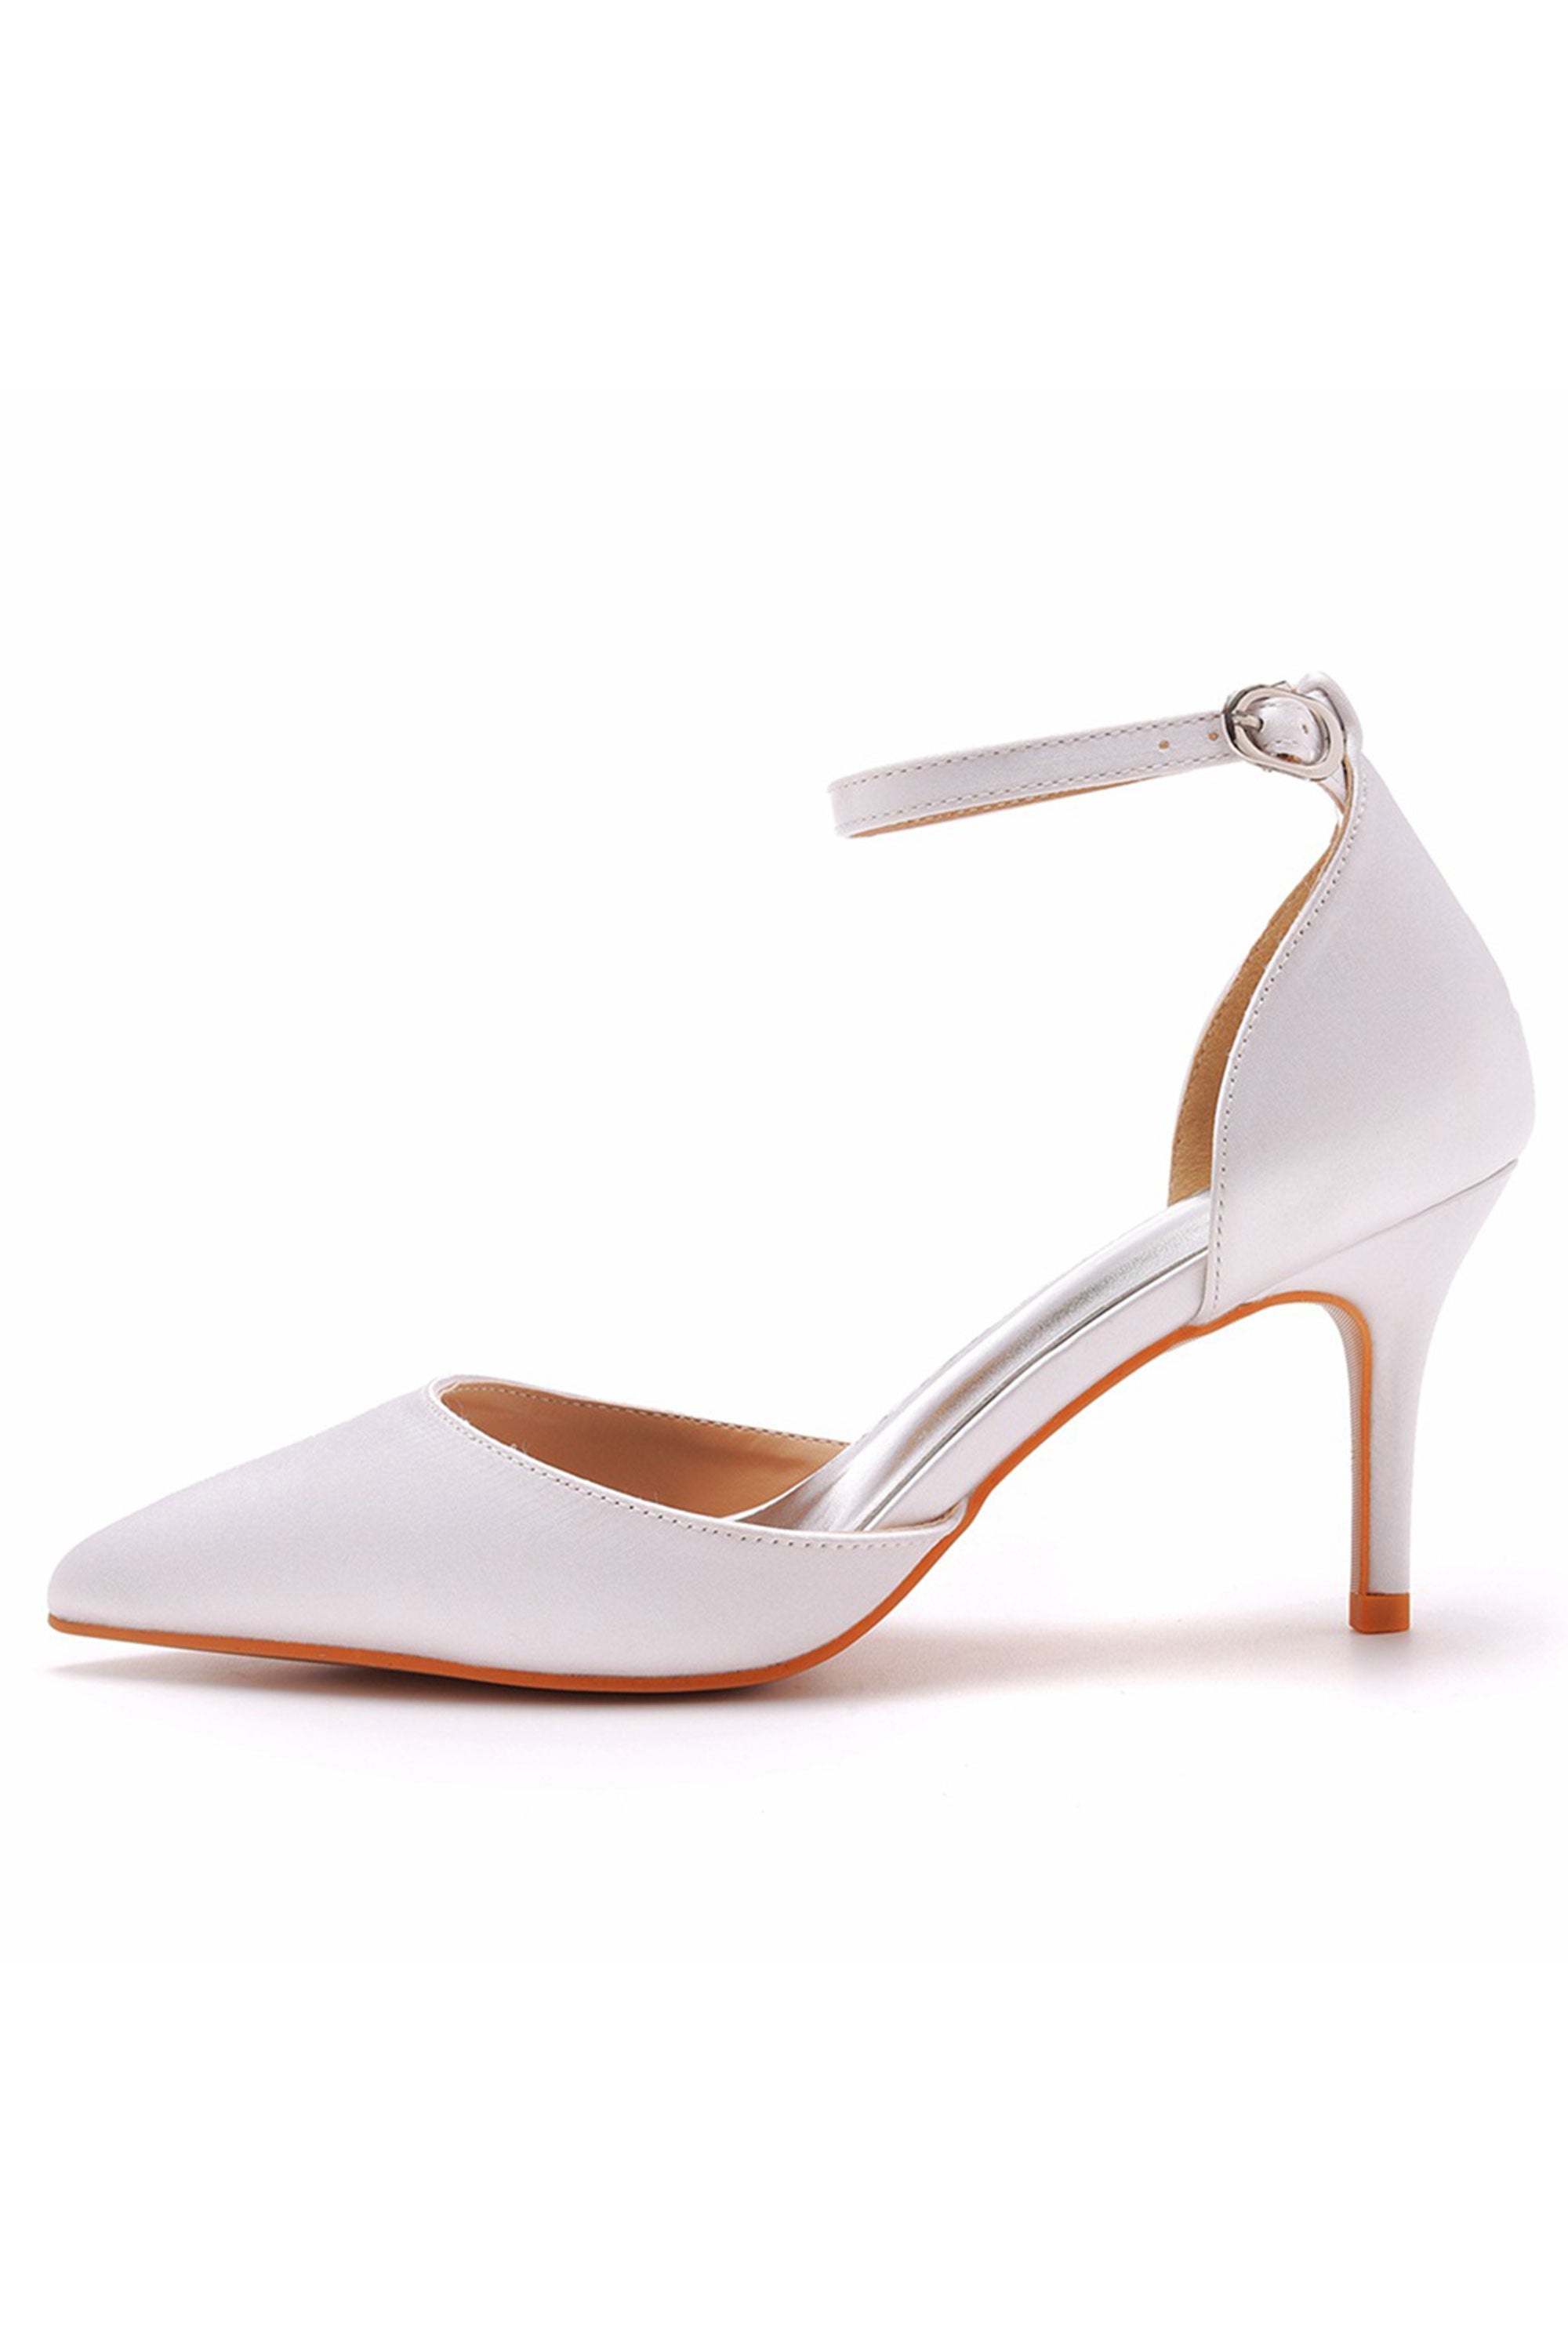 Shoes, Bridal Shoes, Party Shoes - Step into Elegance and Comfort ...